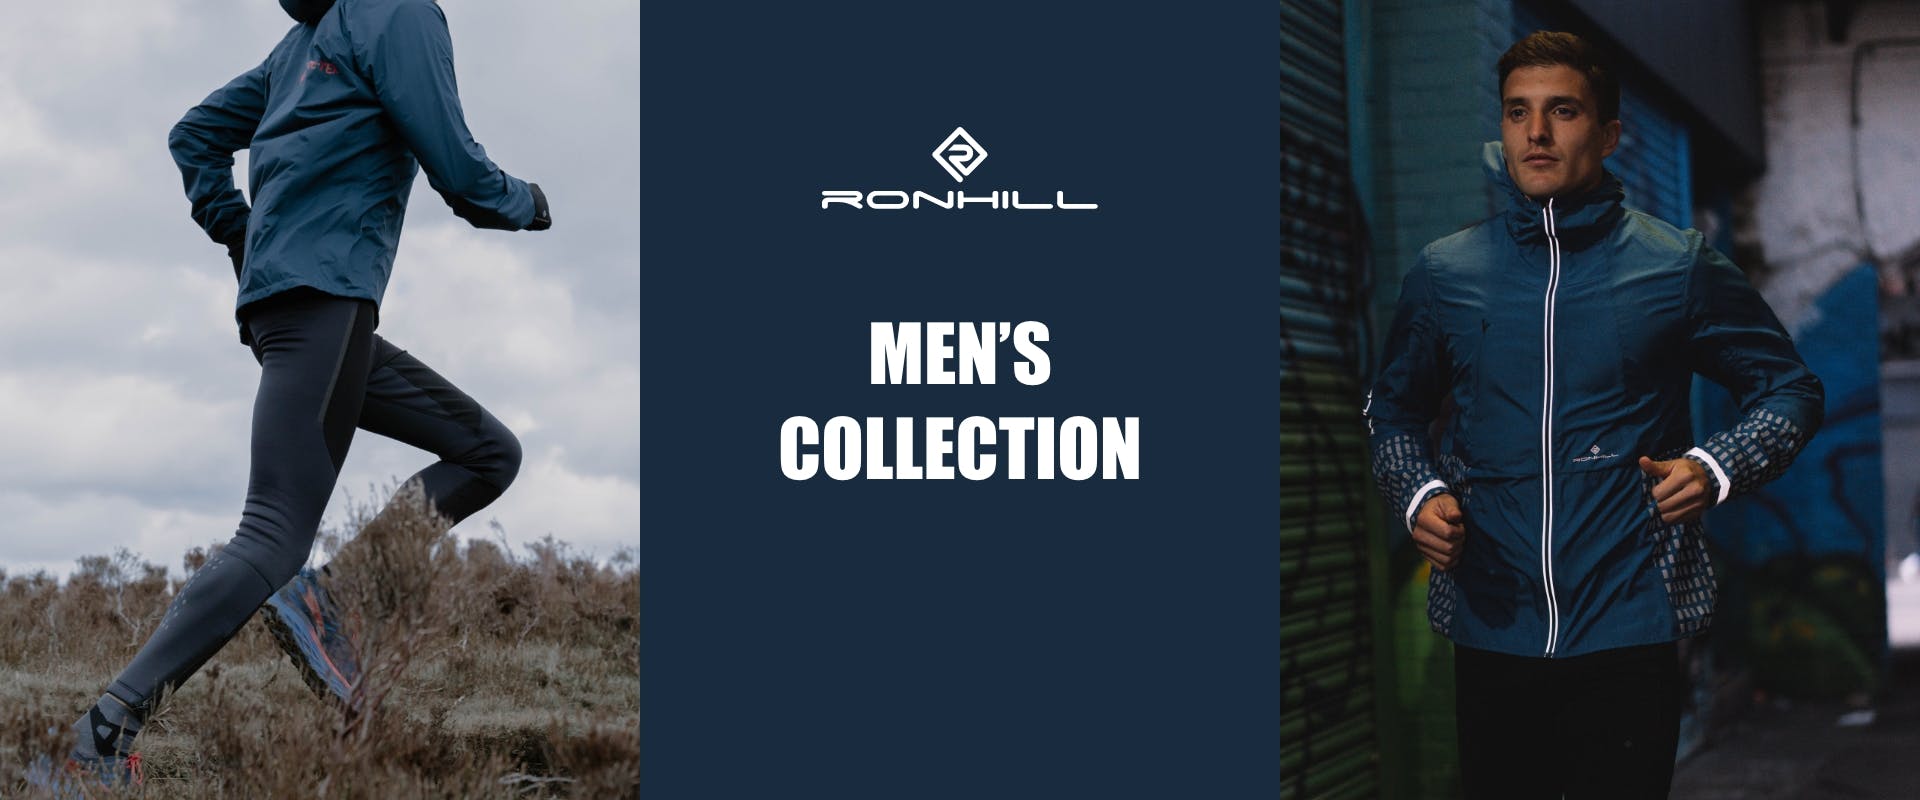 Ronhill Clothing & Accessories